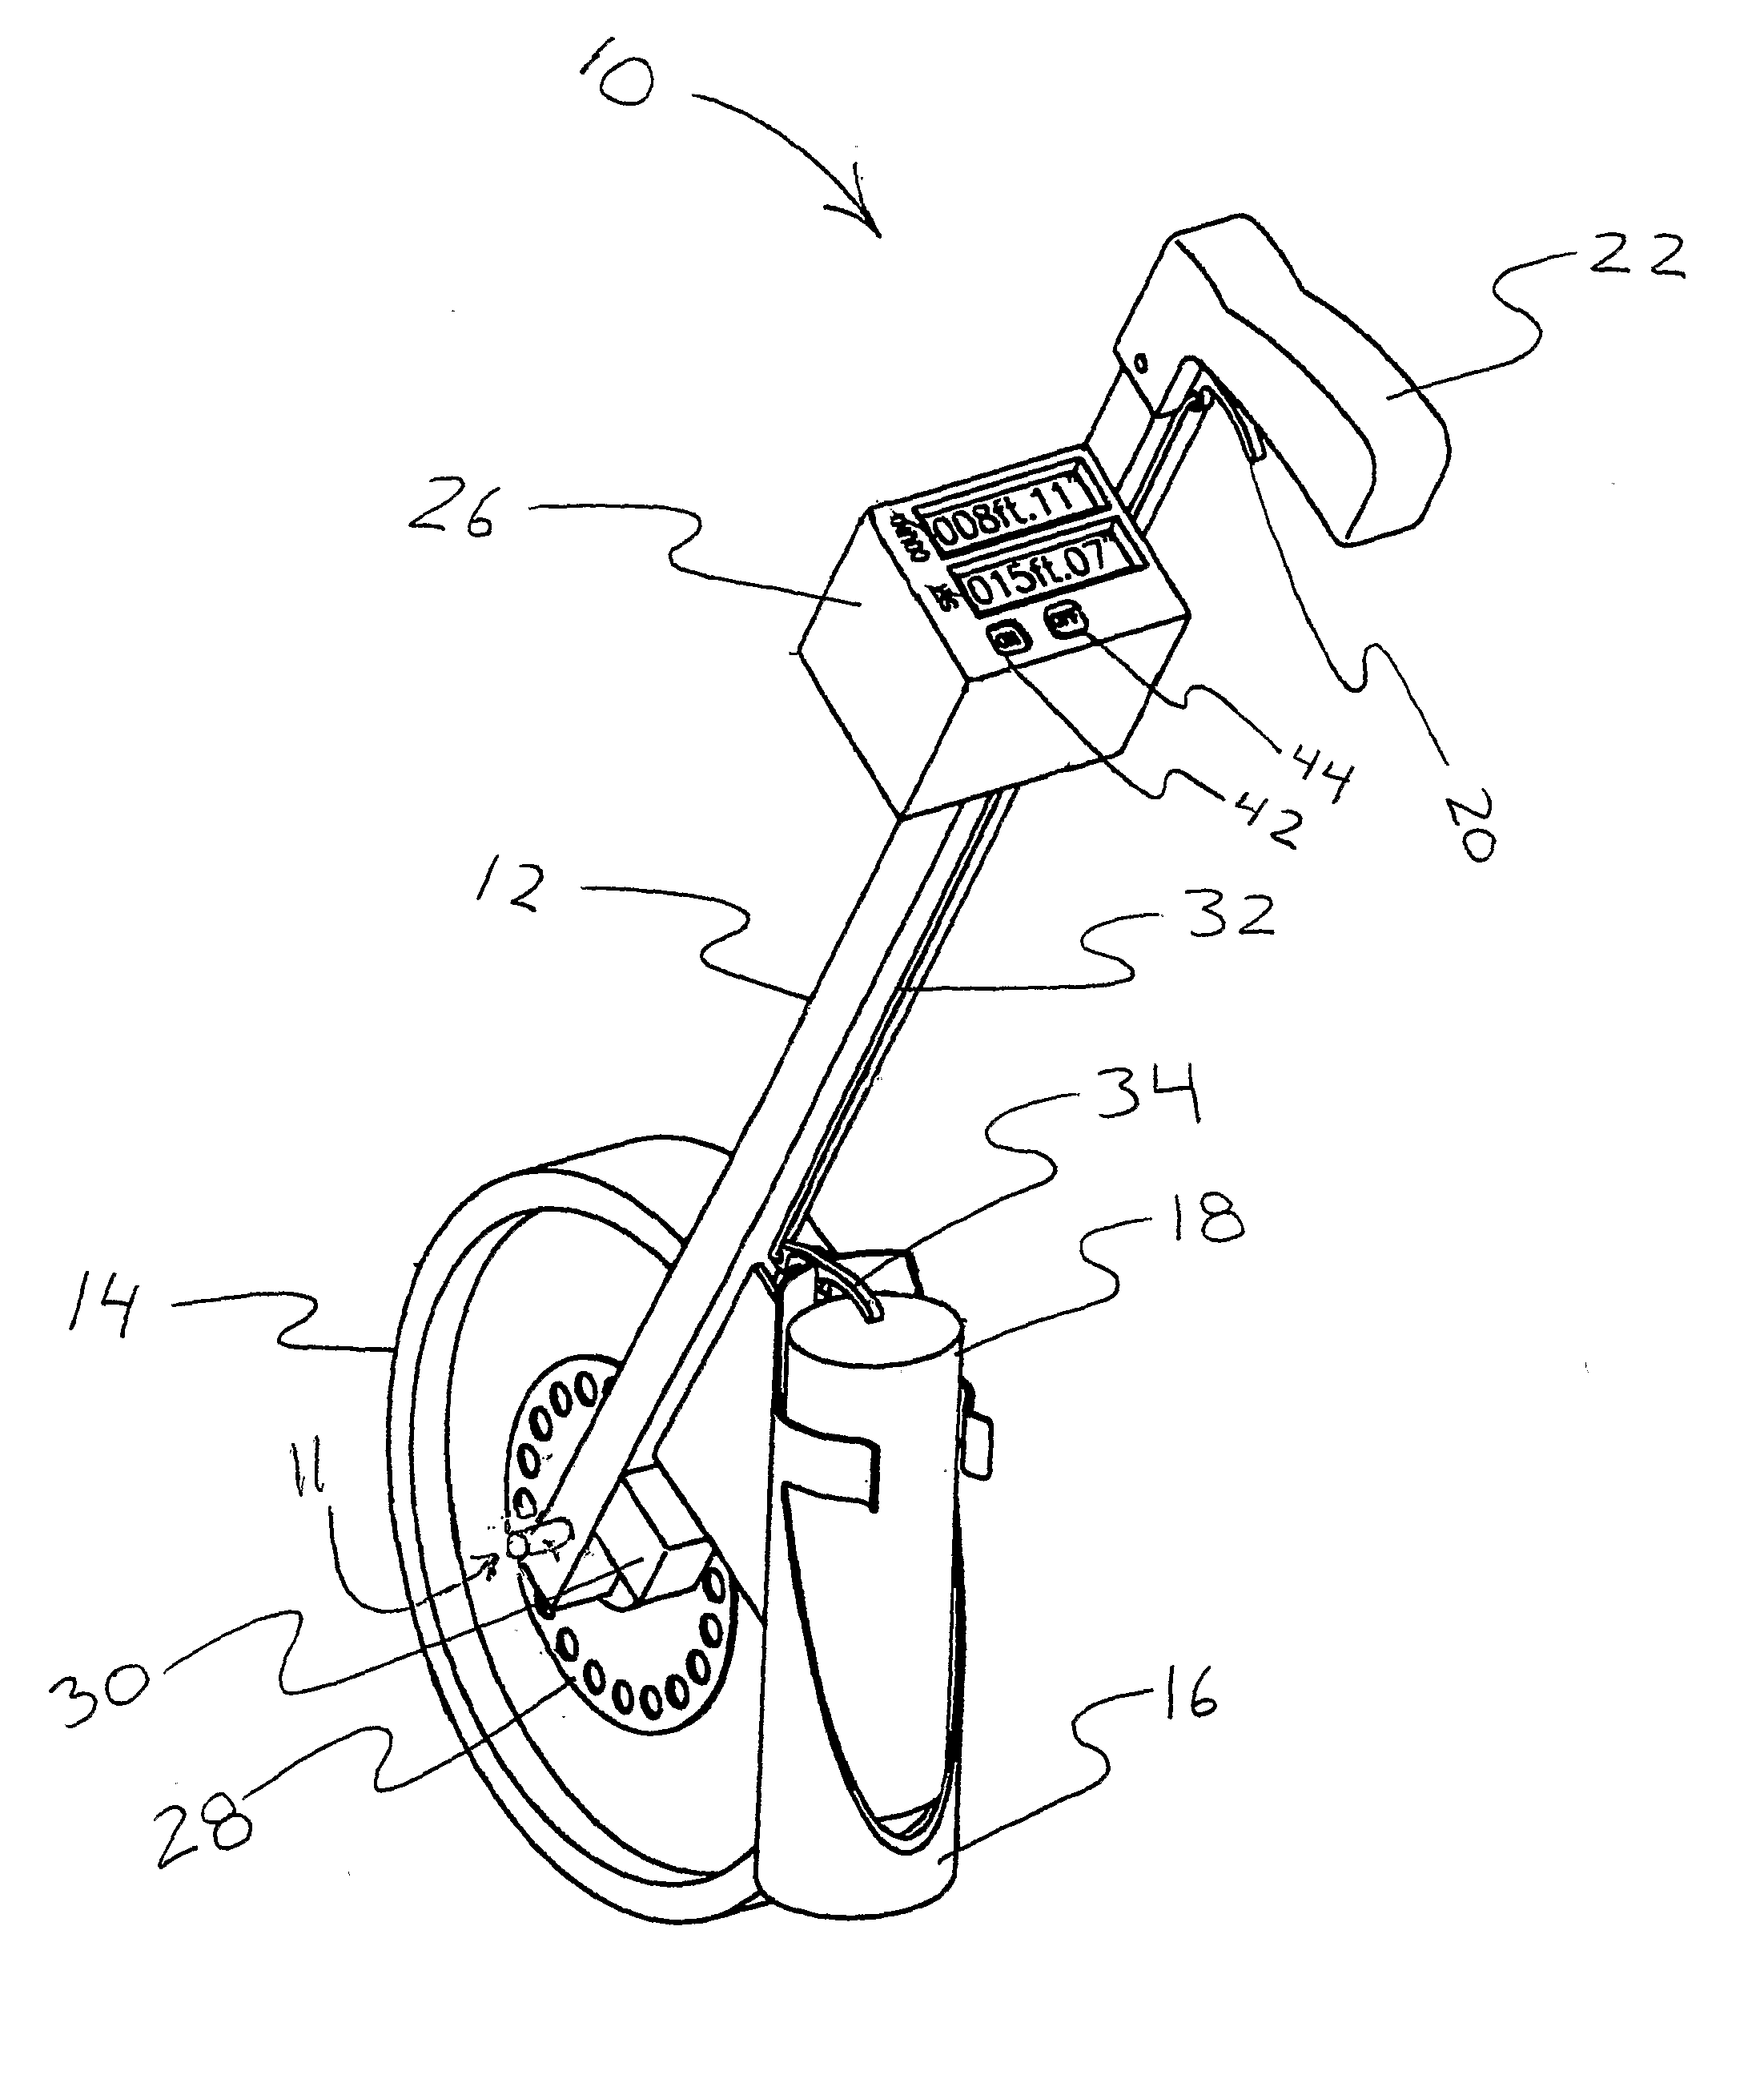 Measuring Roller and Spray Device